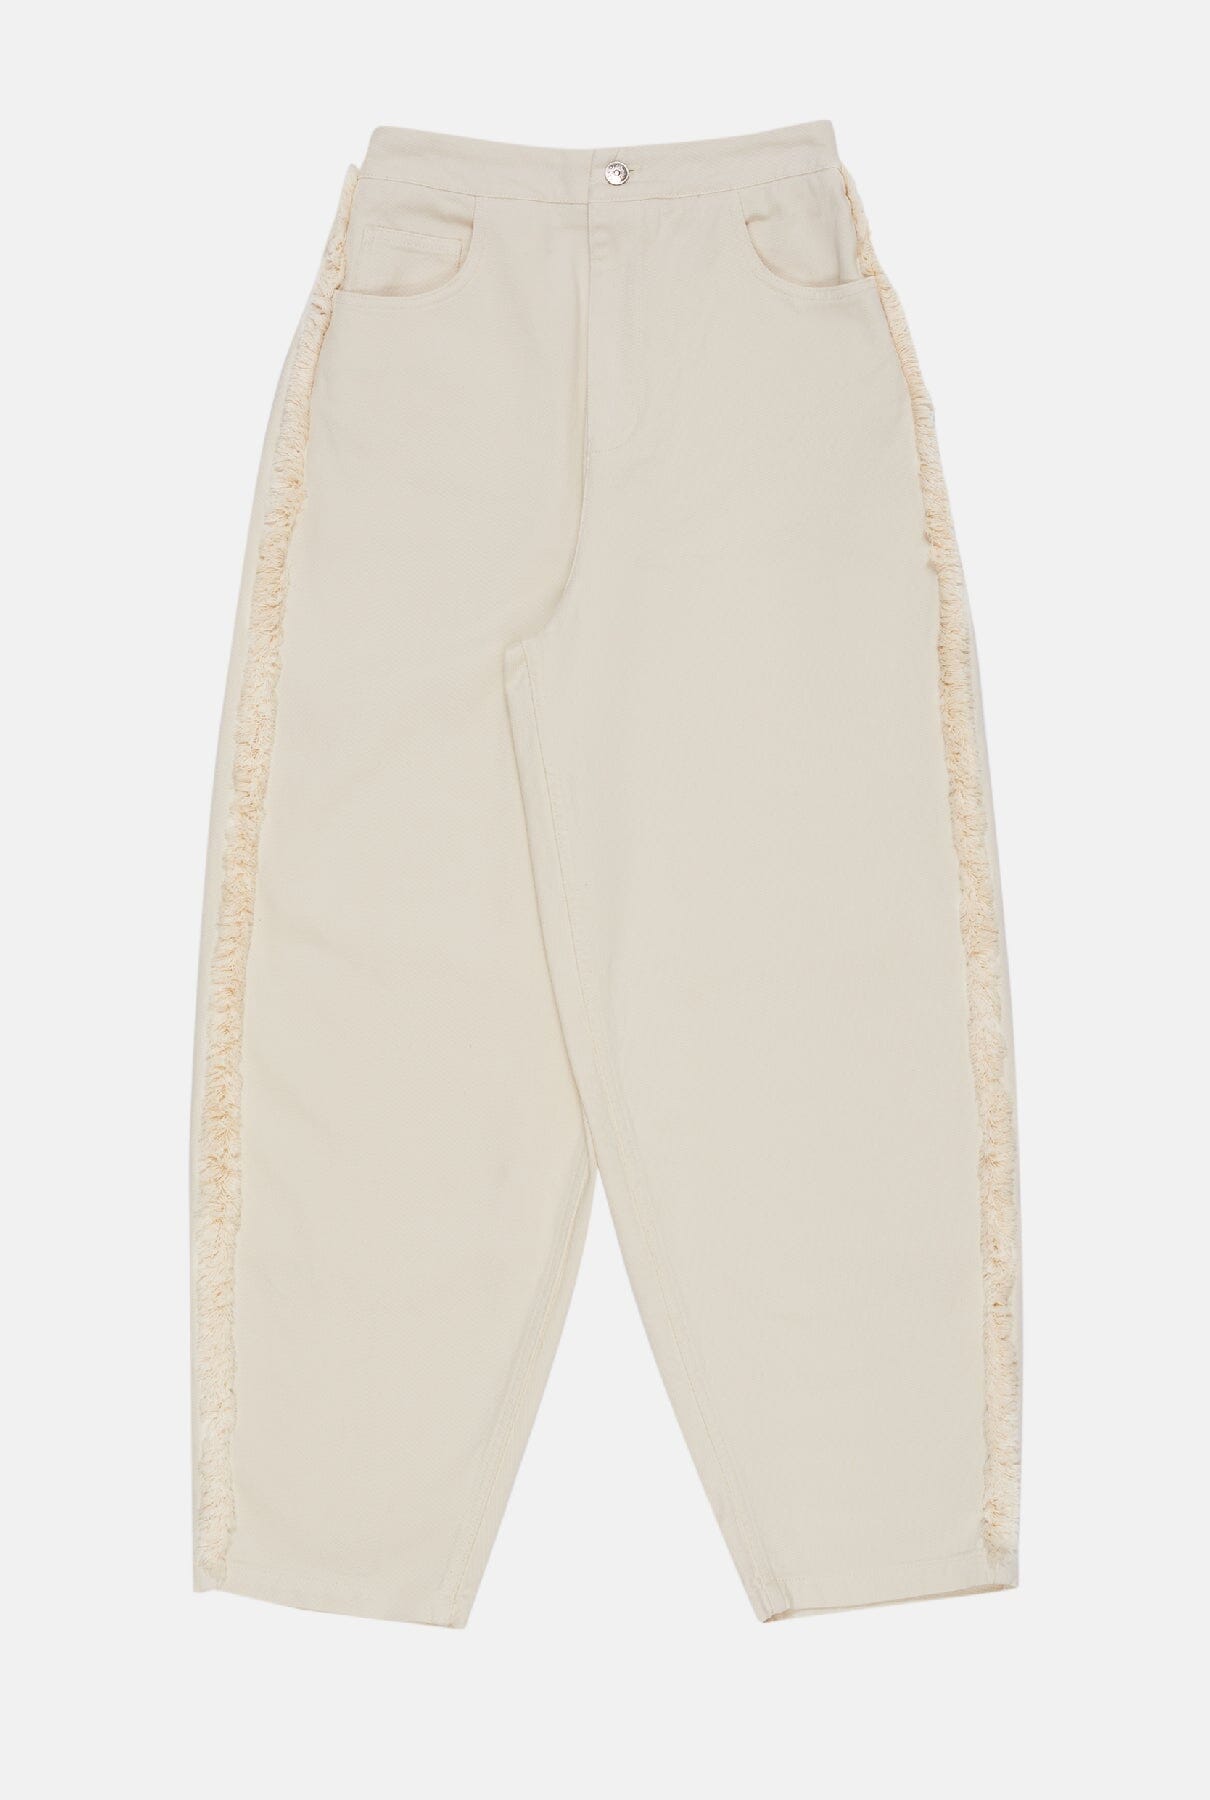 California Denim Woman Pant Natural Trousers The New Society 